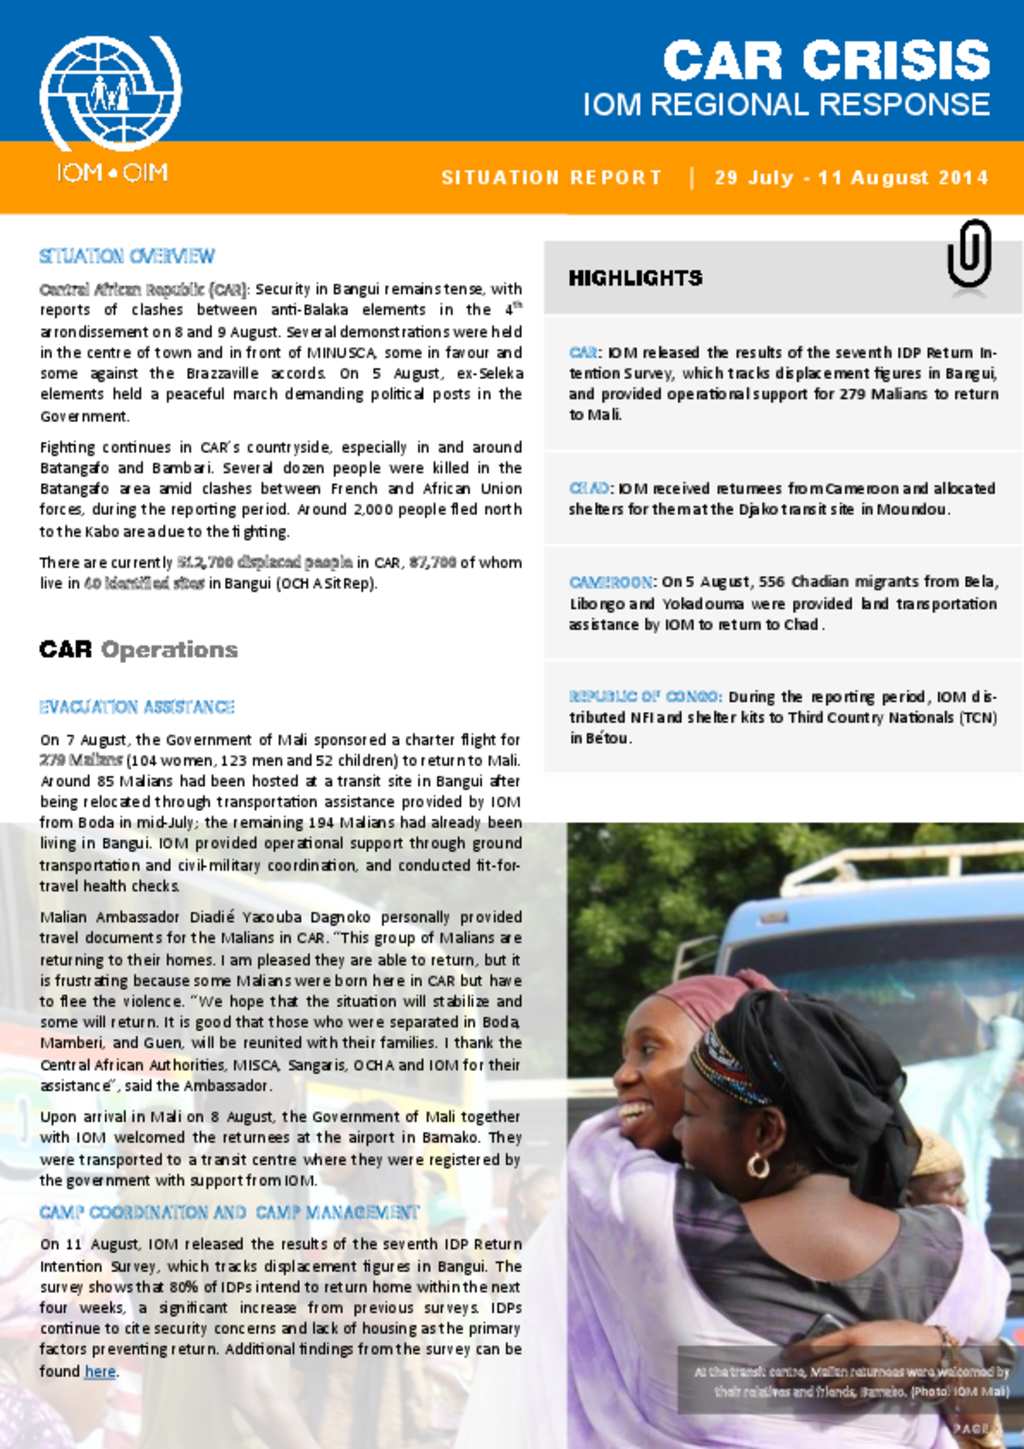 Document IOM Regional Response to the CAR Crisis (29 July 11 August)